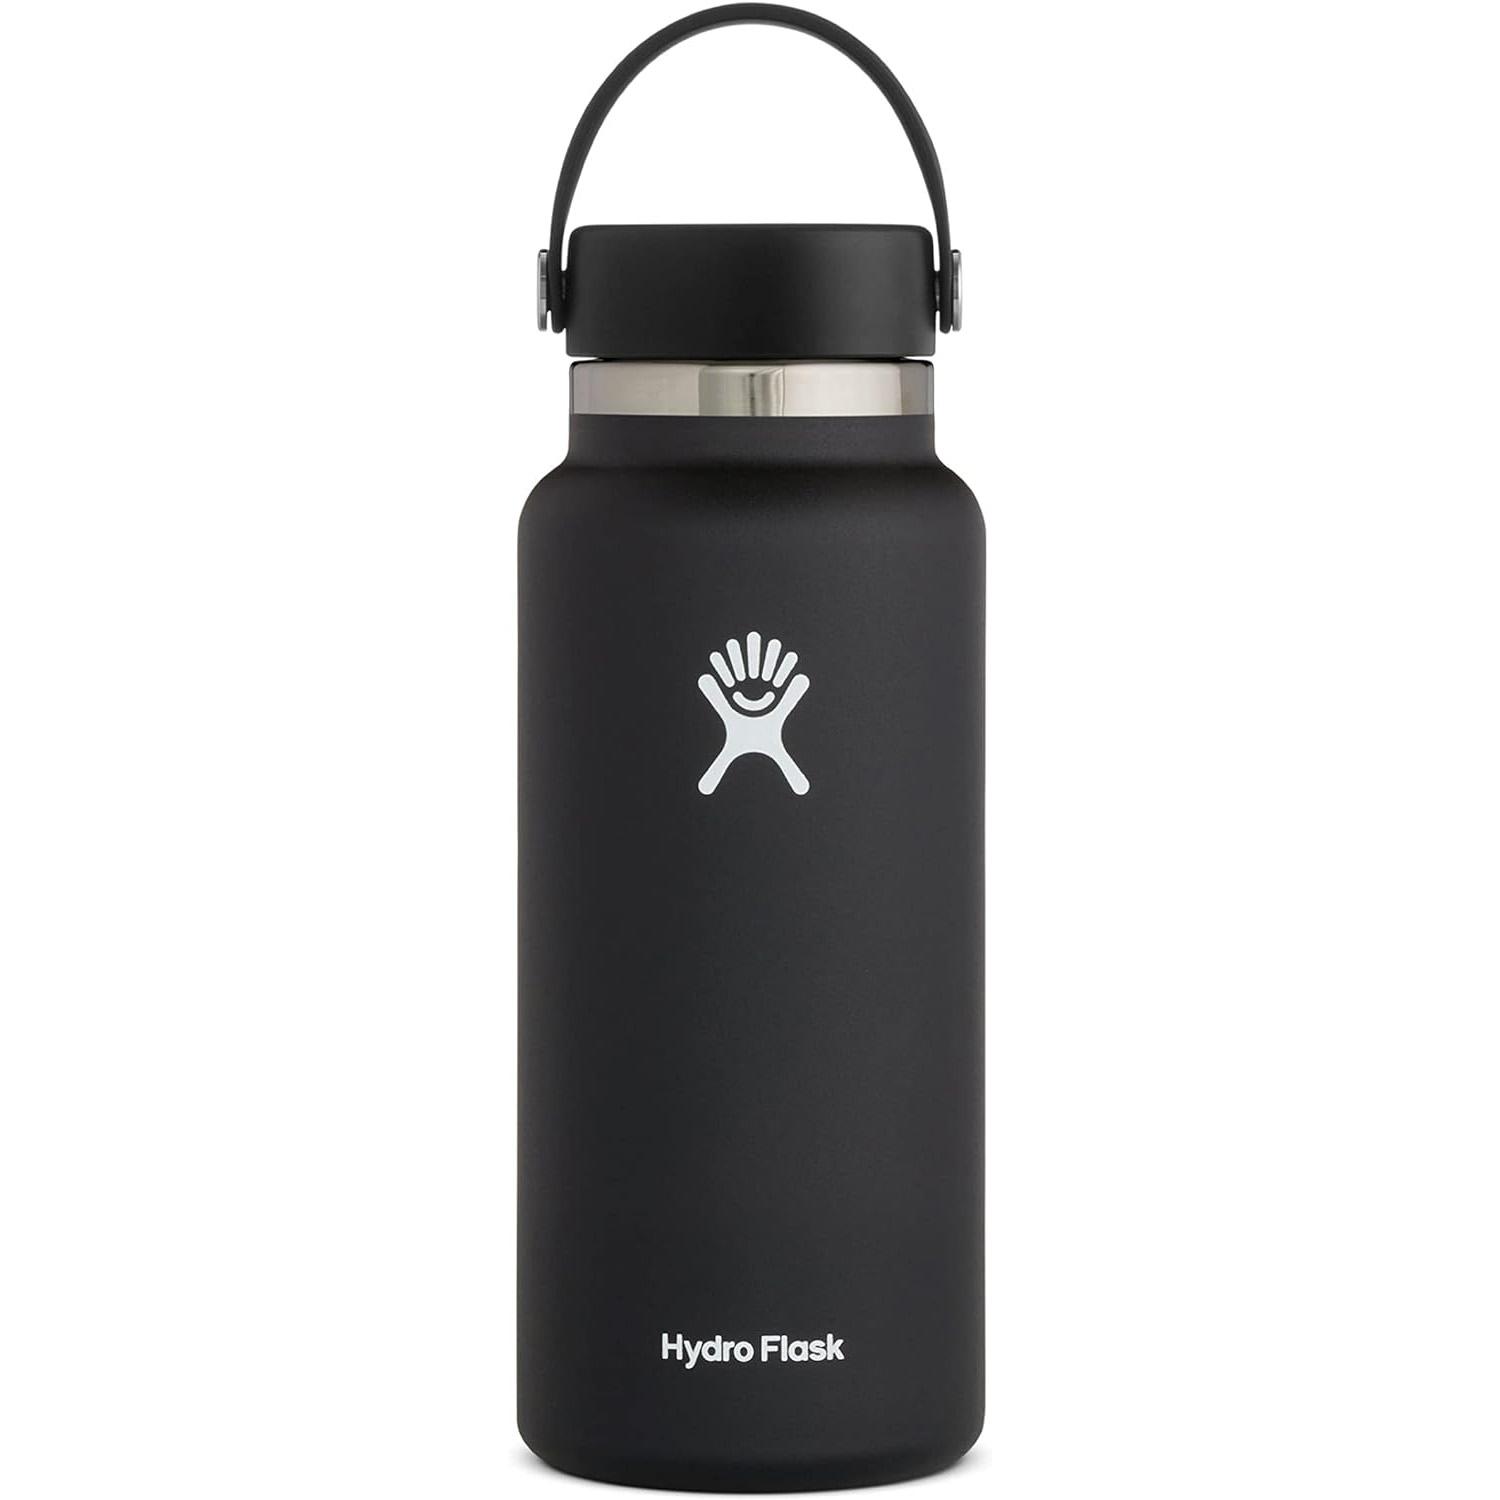 Hydro Flask Stainless Steel Wide Mouth Water Bottle for $20.97